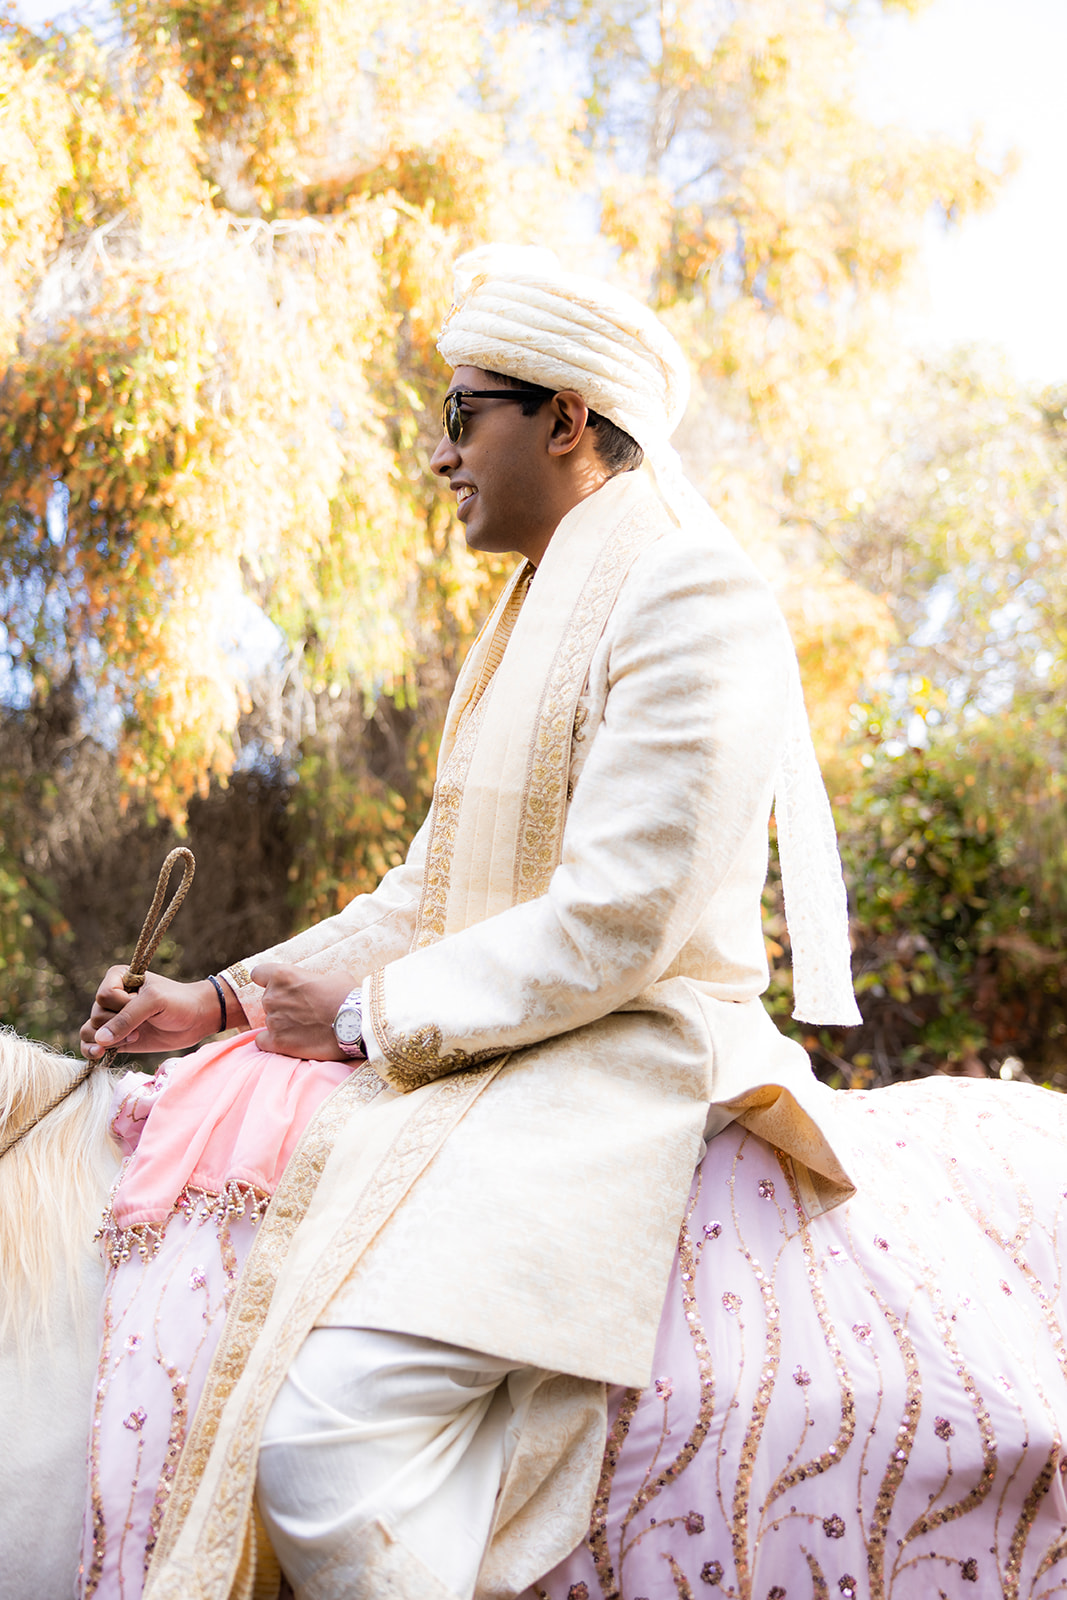 Indian groom rides on top of a horse.